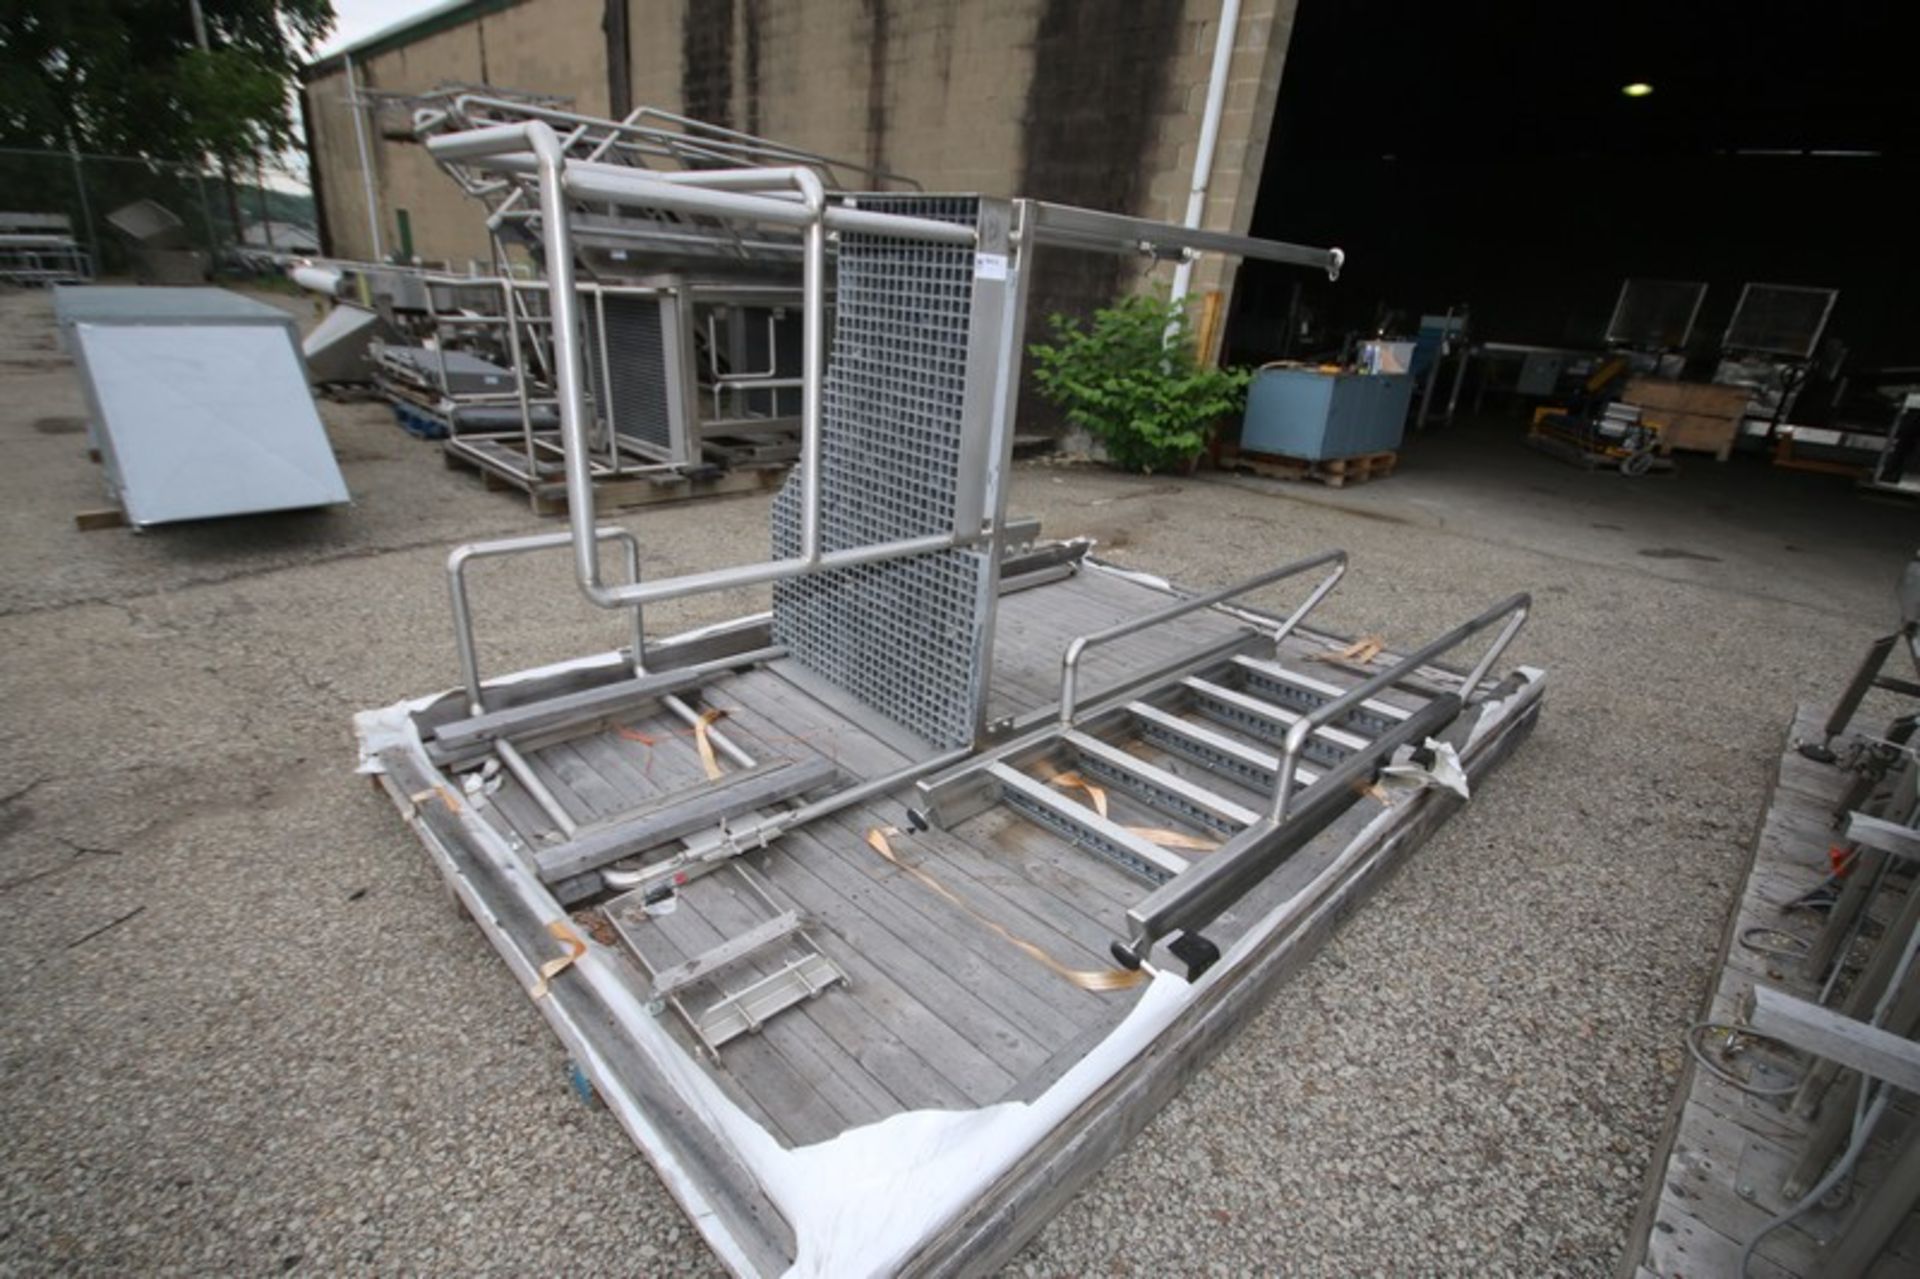 Aprox. 5' L x 42" W x 65" H S/S Tank Operator's Platform with Safety Rail, Plastic Grating, Includes